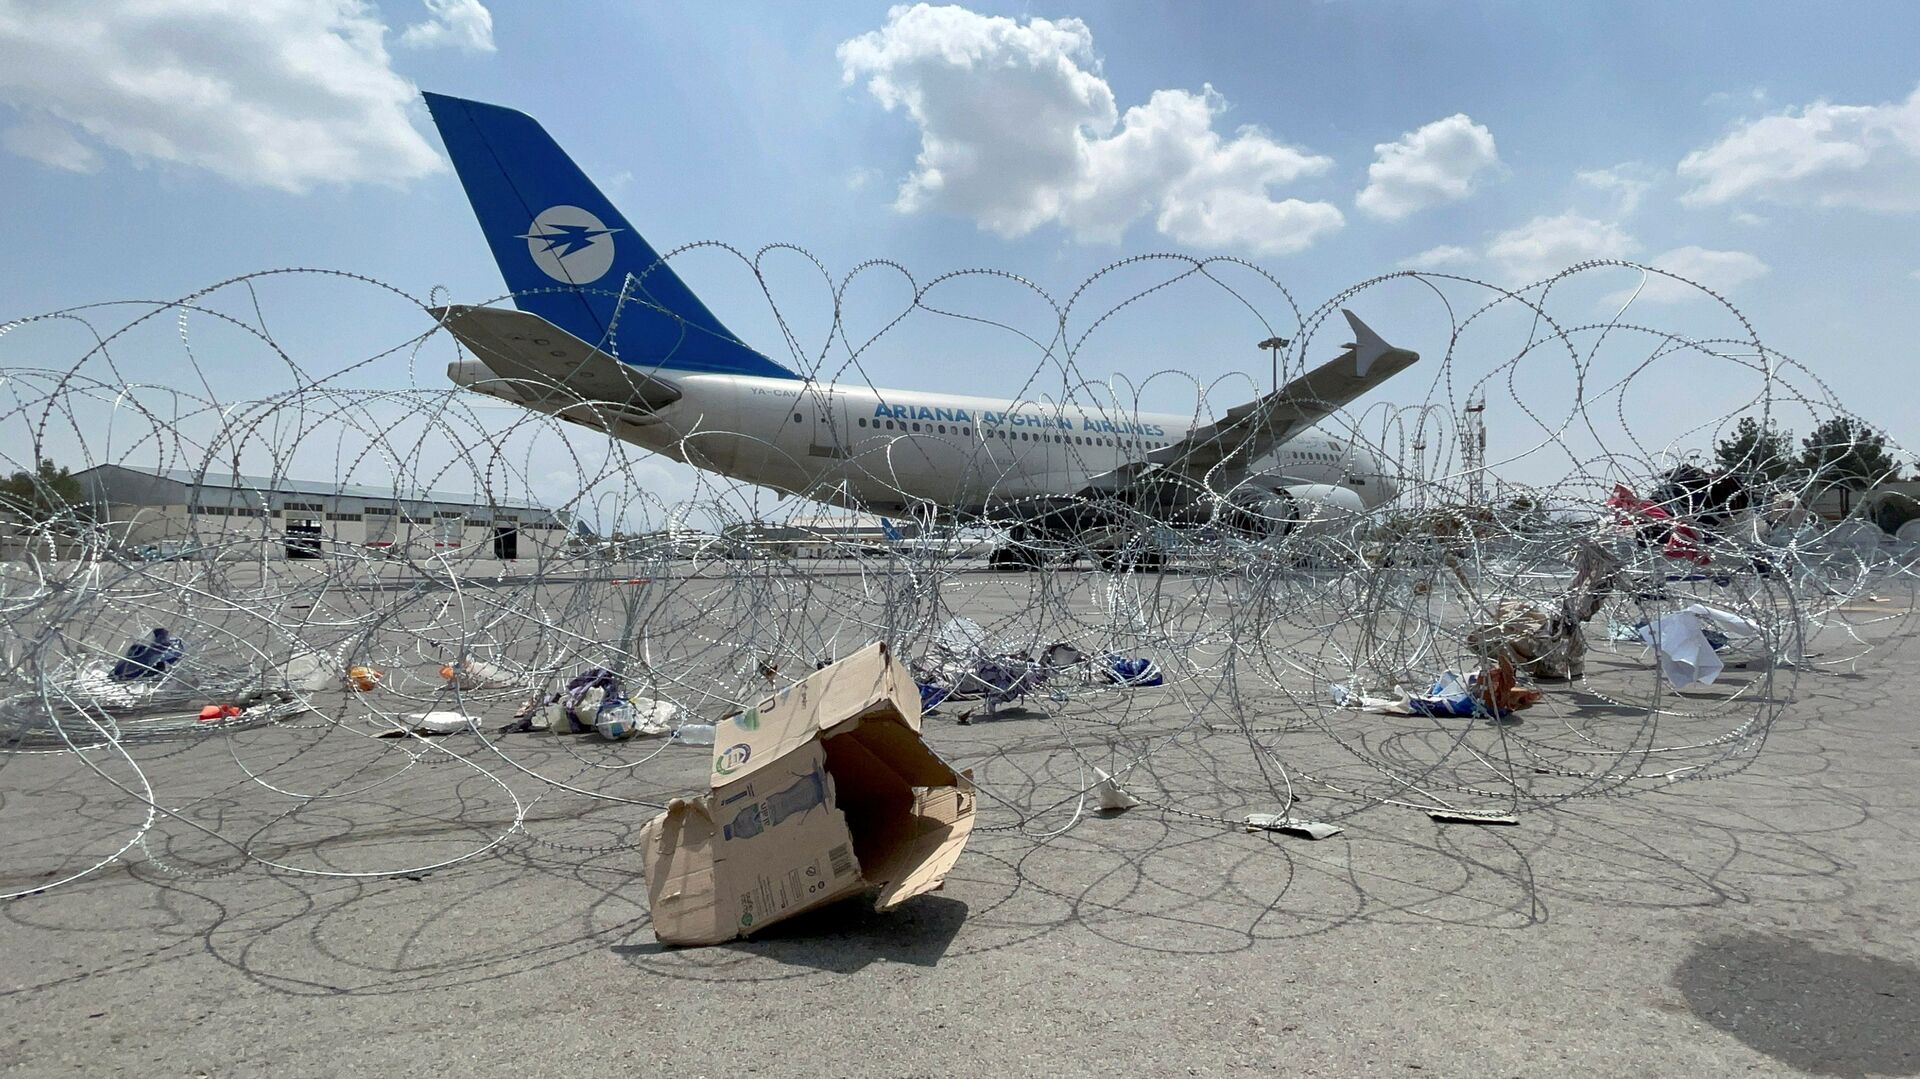 A commercial airplane is seen at Hamid Karzai International Airport a day after U.S troops withdrew in Kabul, Afghanistan, 31 August 2021 - Sputnik International, 1920, 06.09.2021